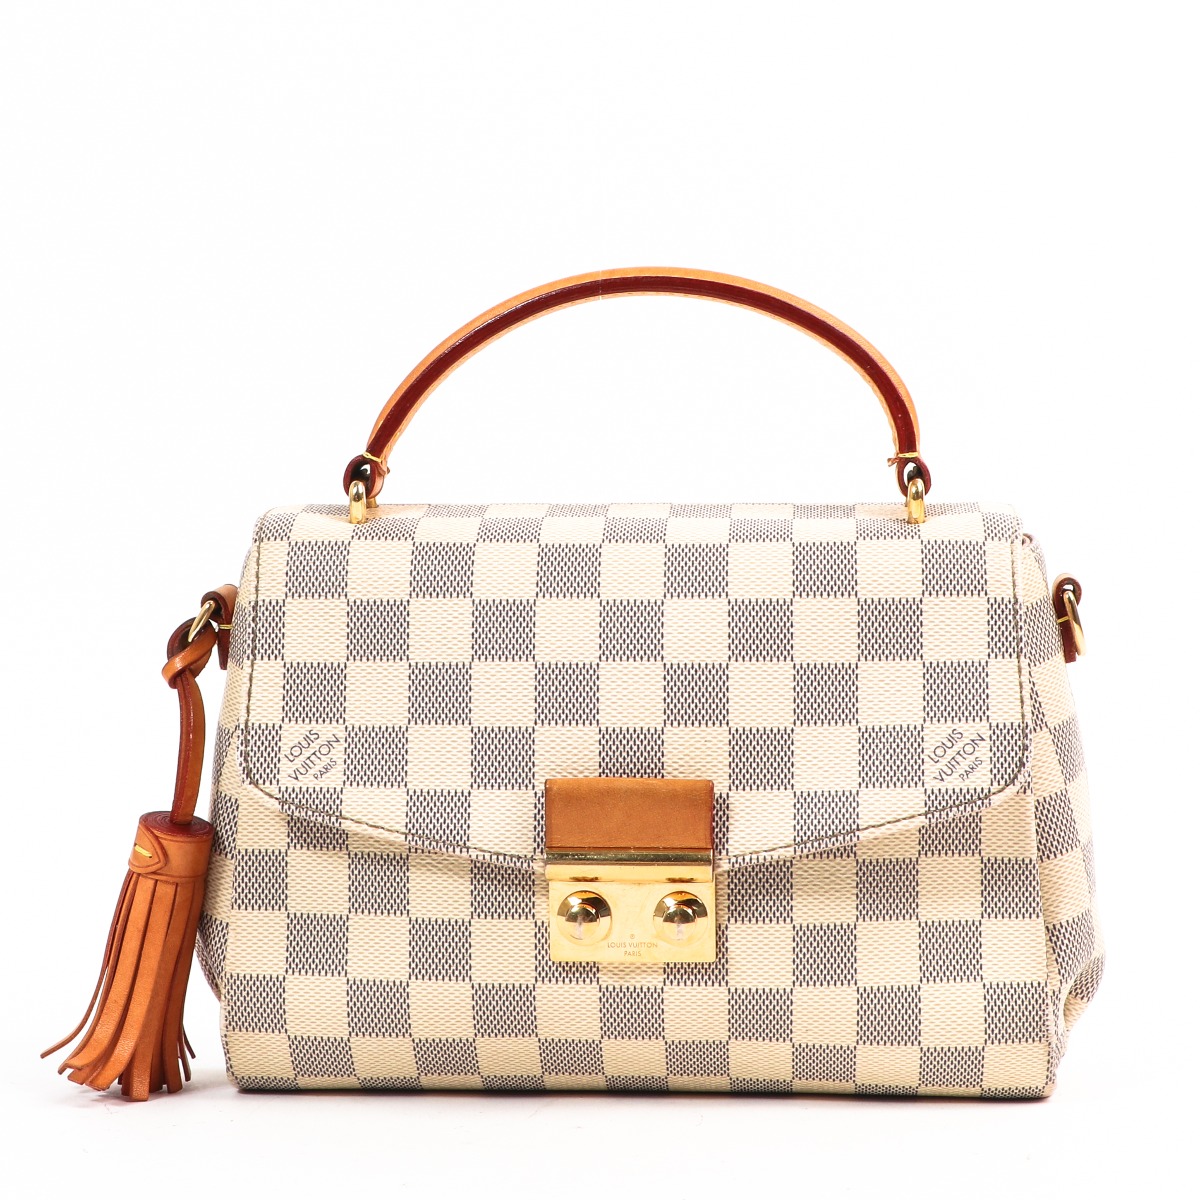 Louis Vuitton - Authenticated Croisette Handbag - Leather White for Women, Very Good Condition